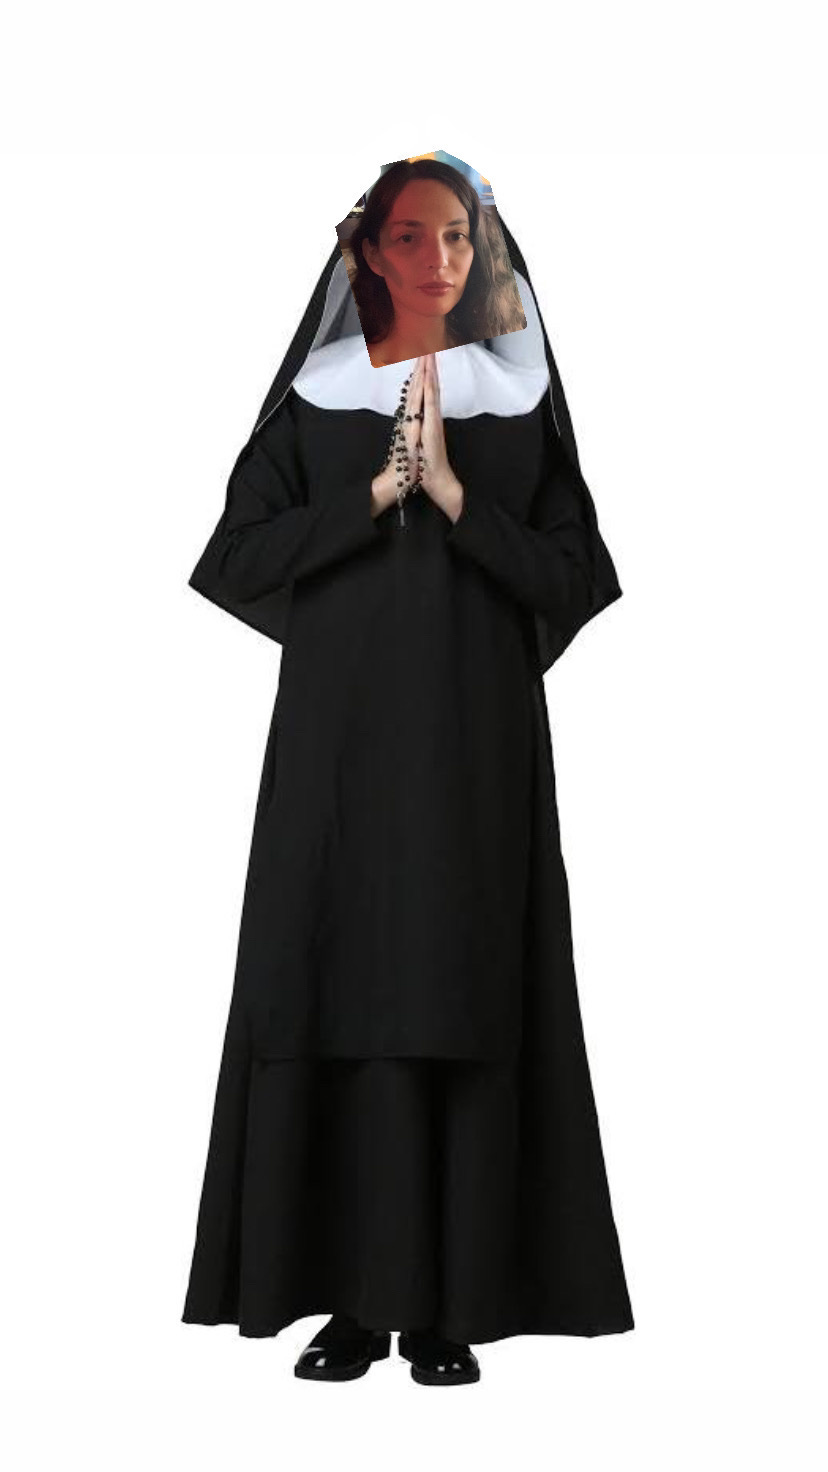 photoshopped image of my head on a nun's body